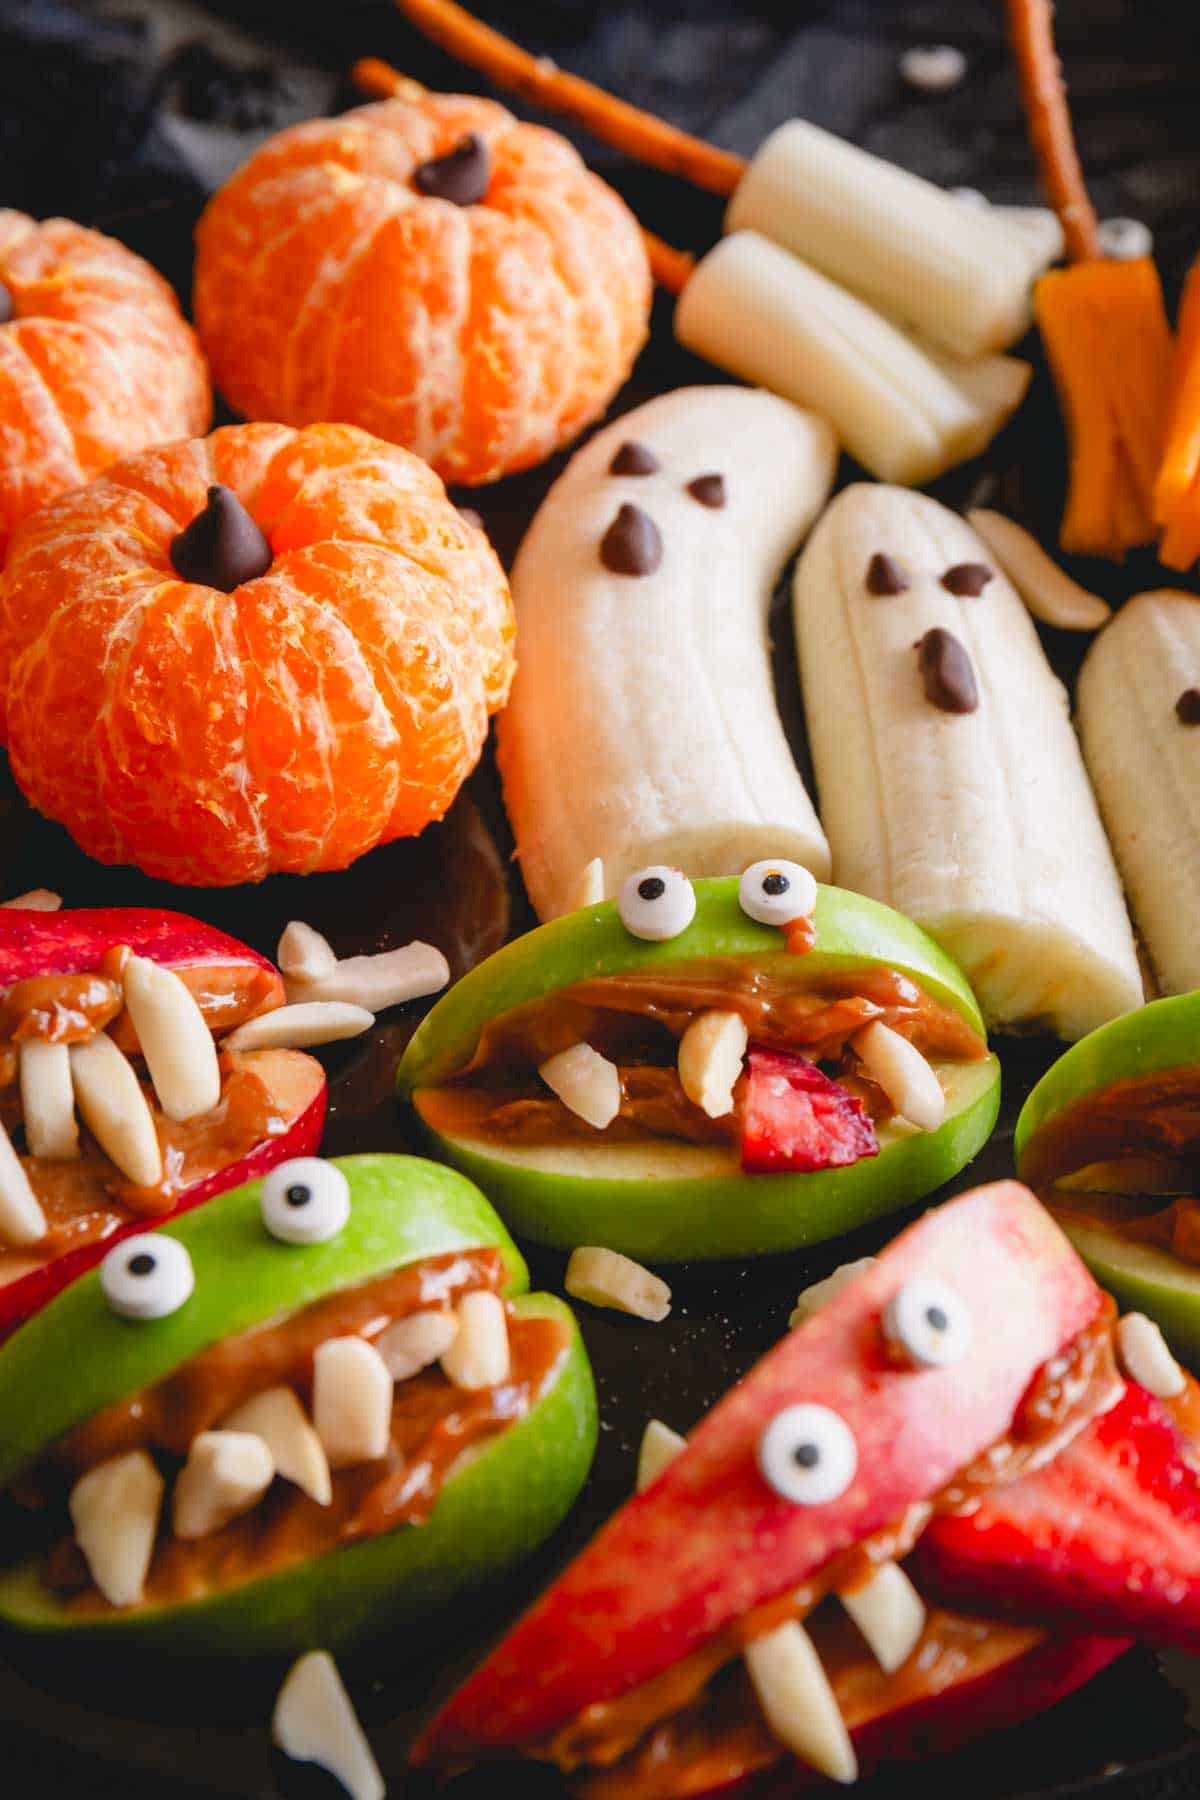 Pumpkin oranges, banana ghosts, and monster apples on a Halloween snack board.